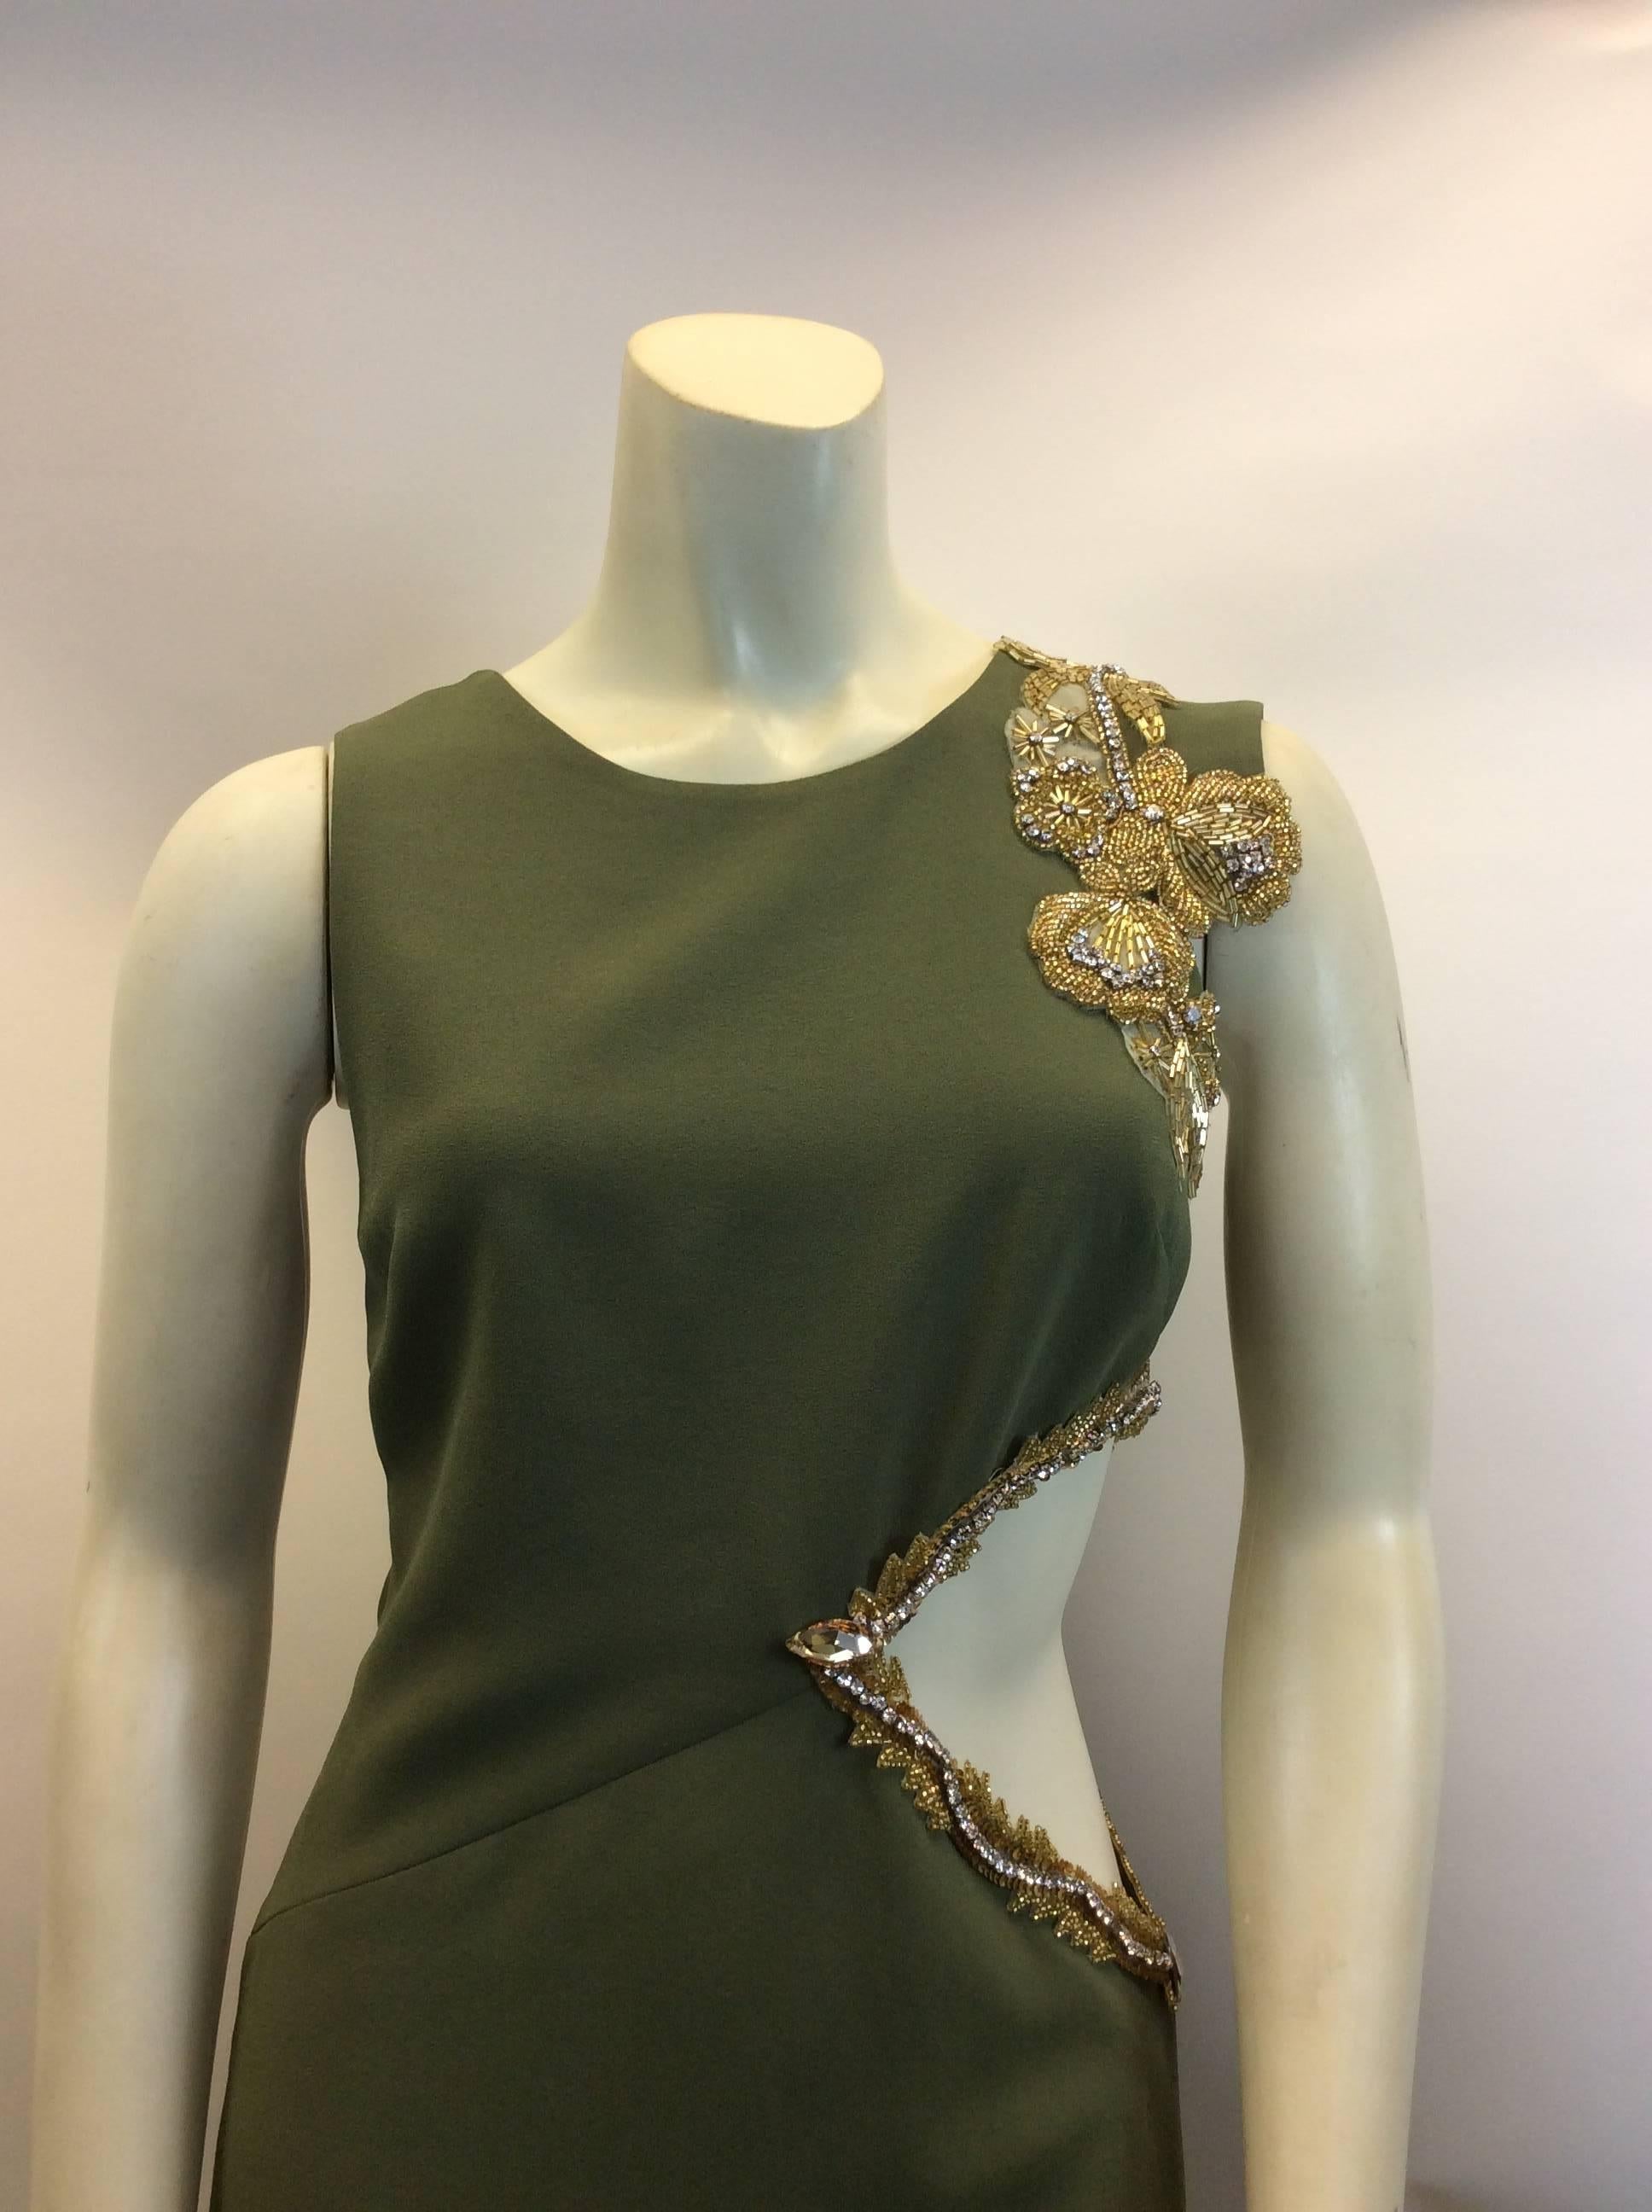 Max azria Olive Sequin Cut Out Dress
Size xxs
Made in China
$165
100% polyester exterior, 100% silk interior lining
